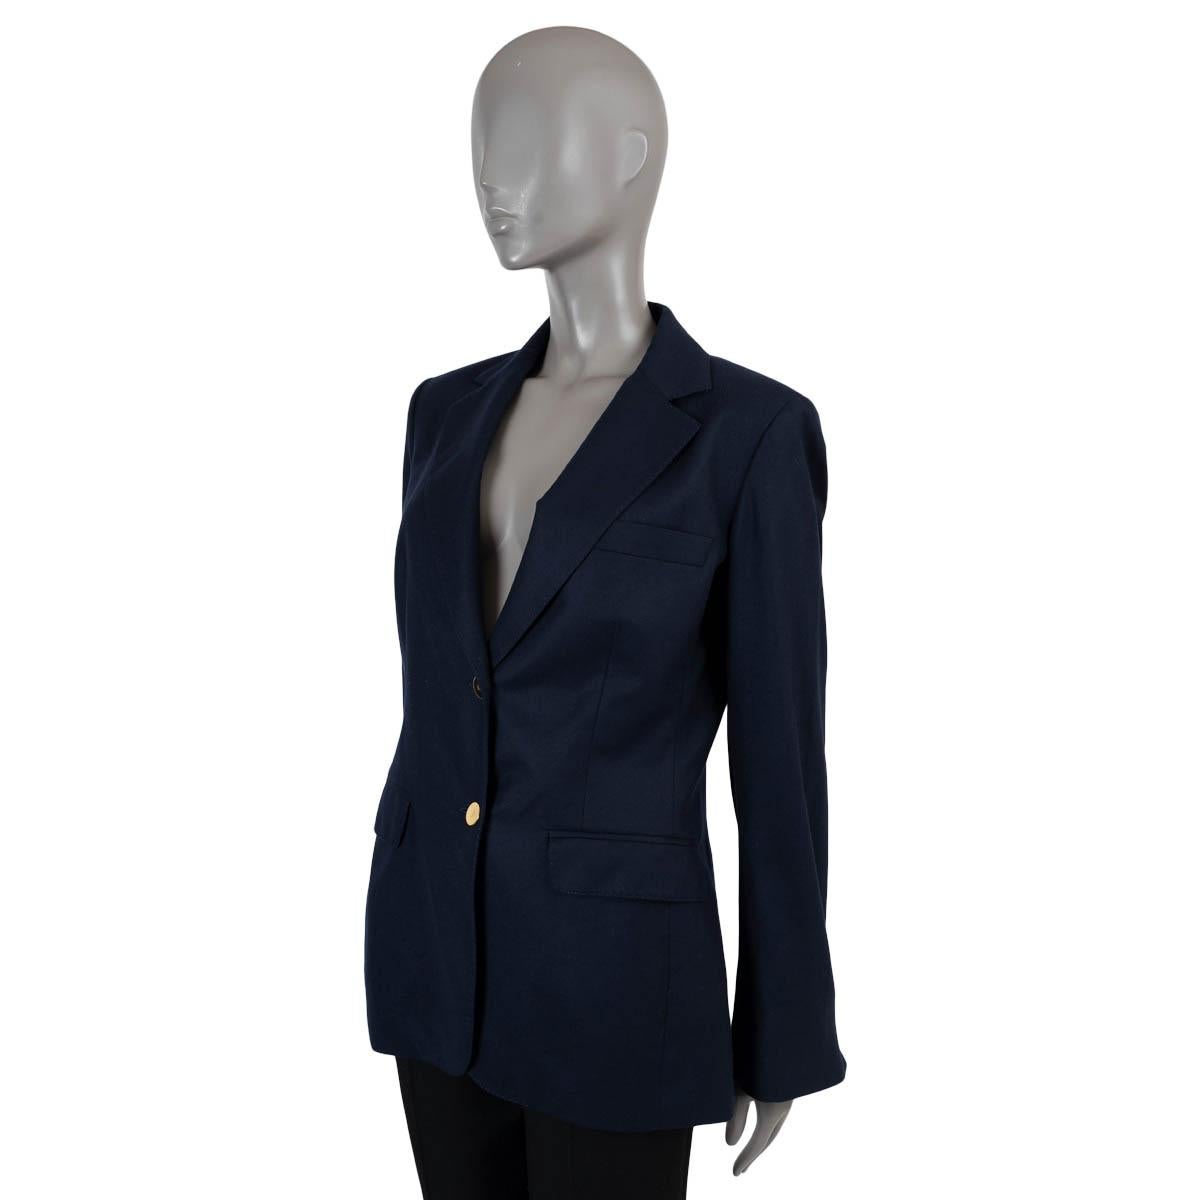 100% authentic Loro Piana blazer in navy blue cashmere (100%). Features peak lapels, two flap pockets and shoulder pads. Closes with gold-tone logo buttons and is lined in silk (100%). Has been worn and is in excellent condition.